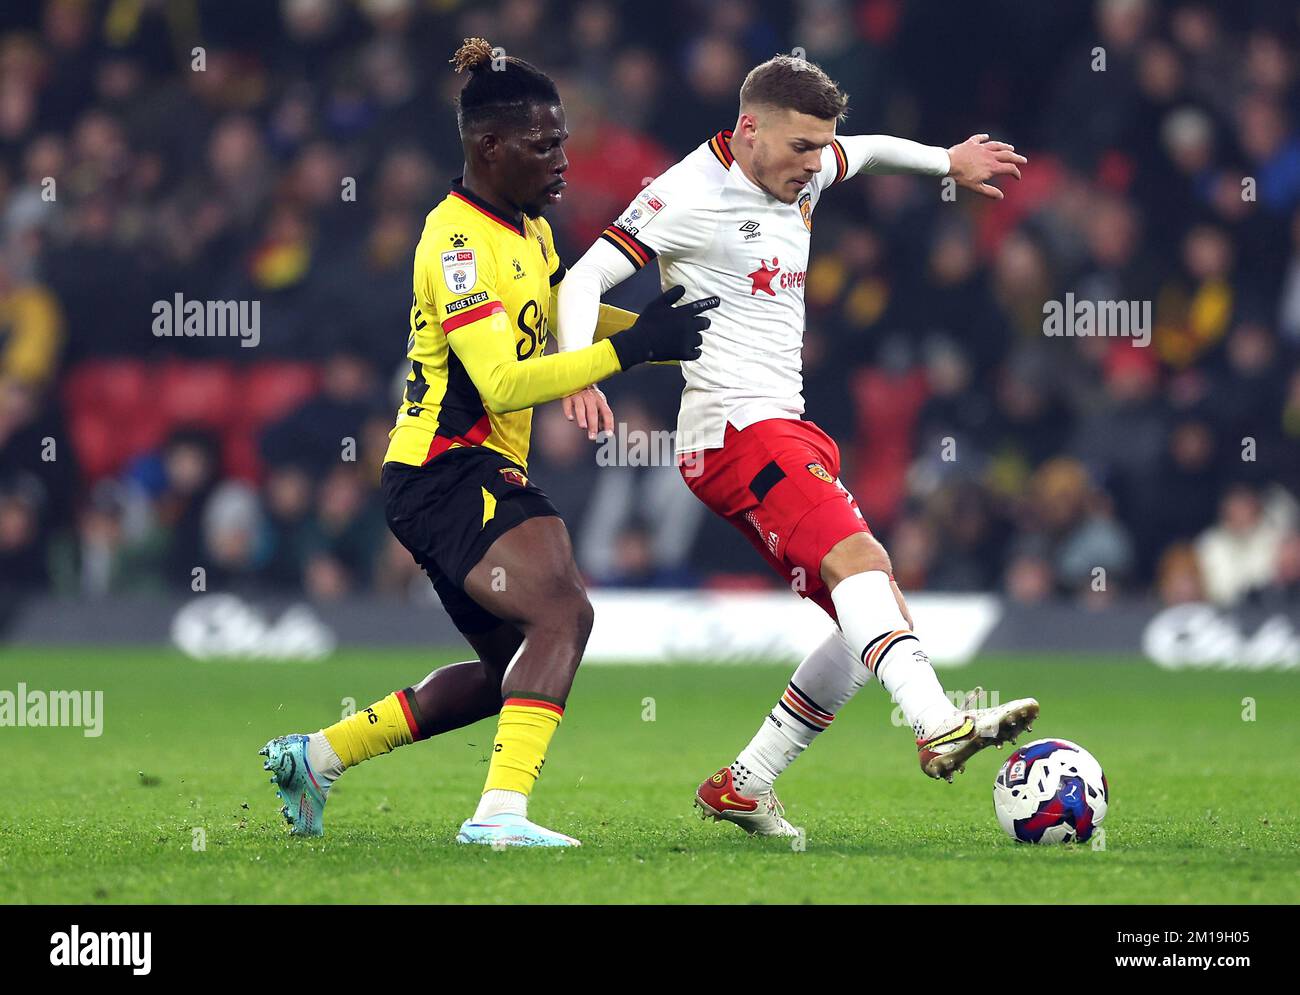 Hull City's Regan Slater (right) and Watford's Tom Dele-Bashiru battle for the ball during the Sky Bet Championship match at Vicarage Road, Watford. Picture date: Sunday December 11, 2022. Stock Photo